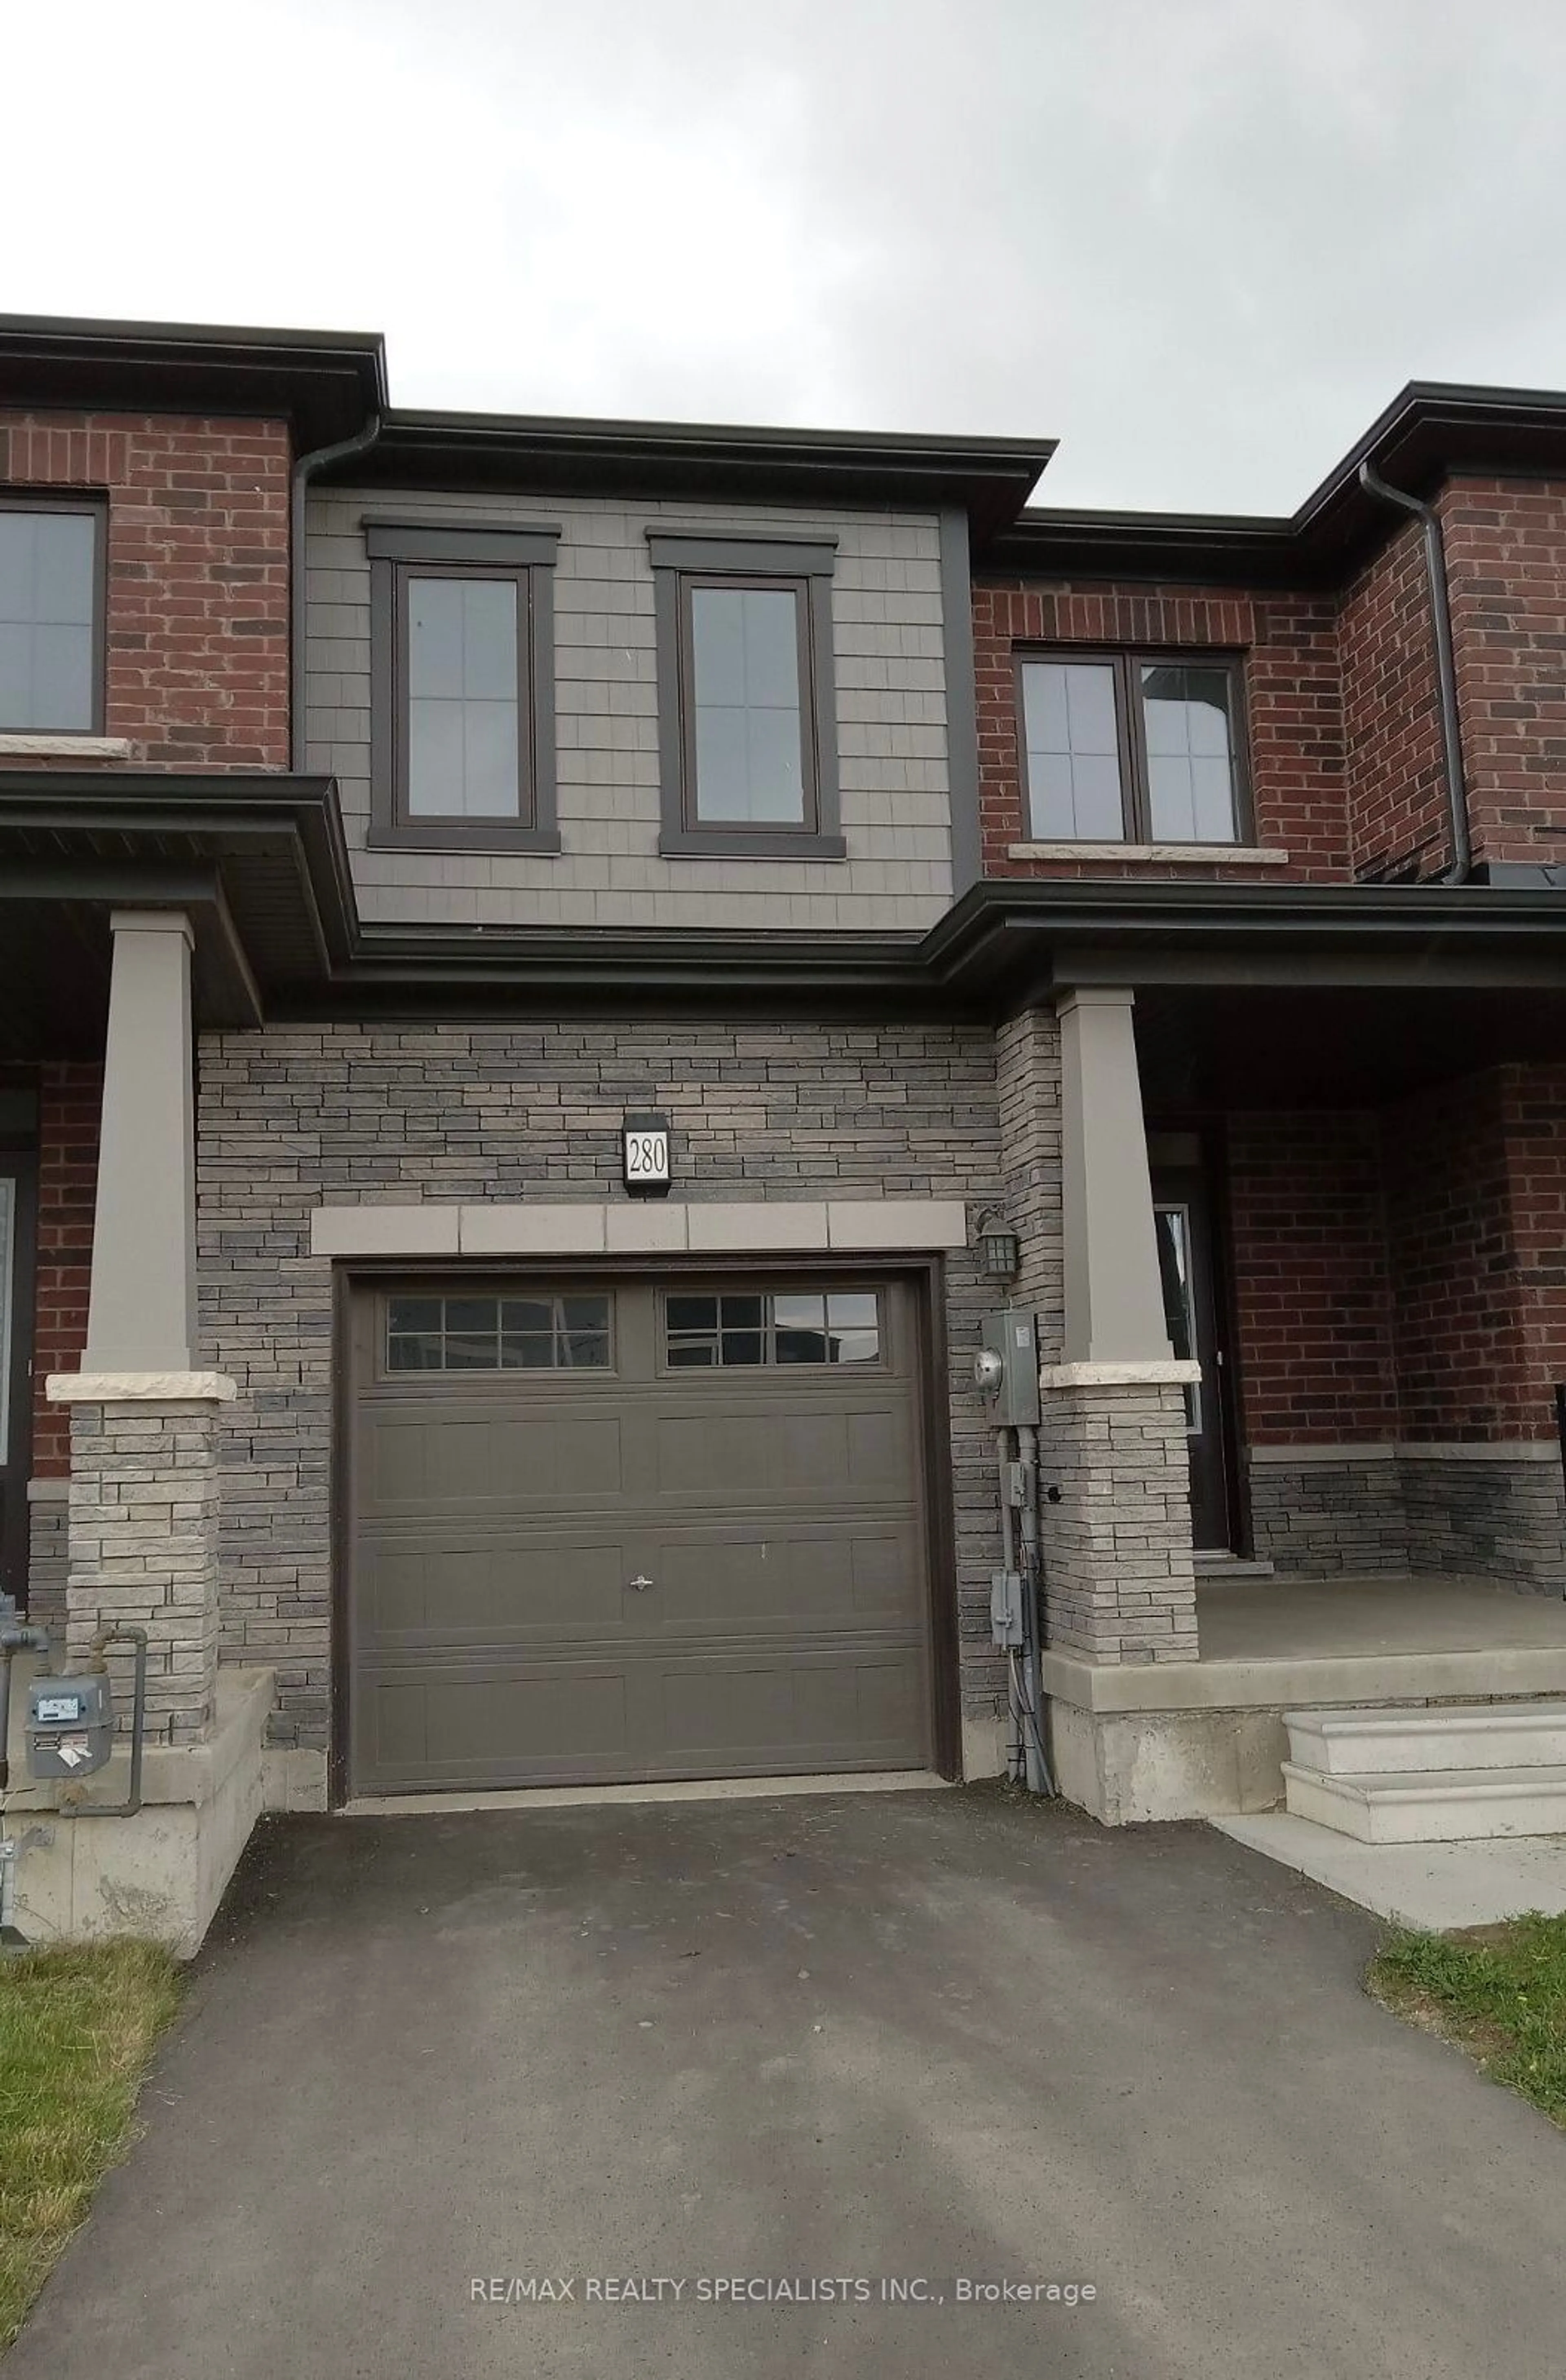 Home with brick exterior material for 280 EXPLORER Way, Thorold Ontario L2V 0K2